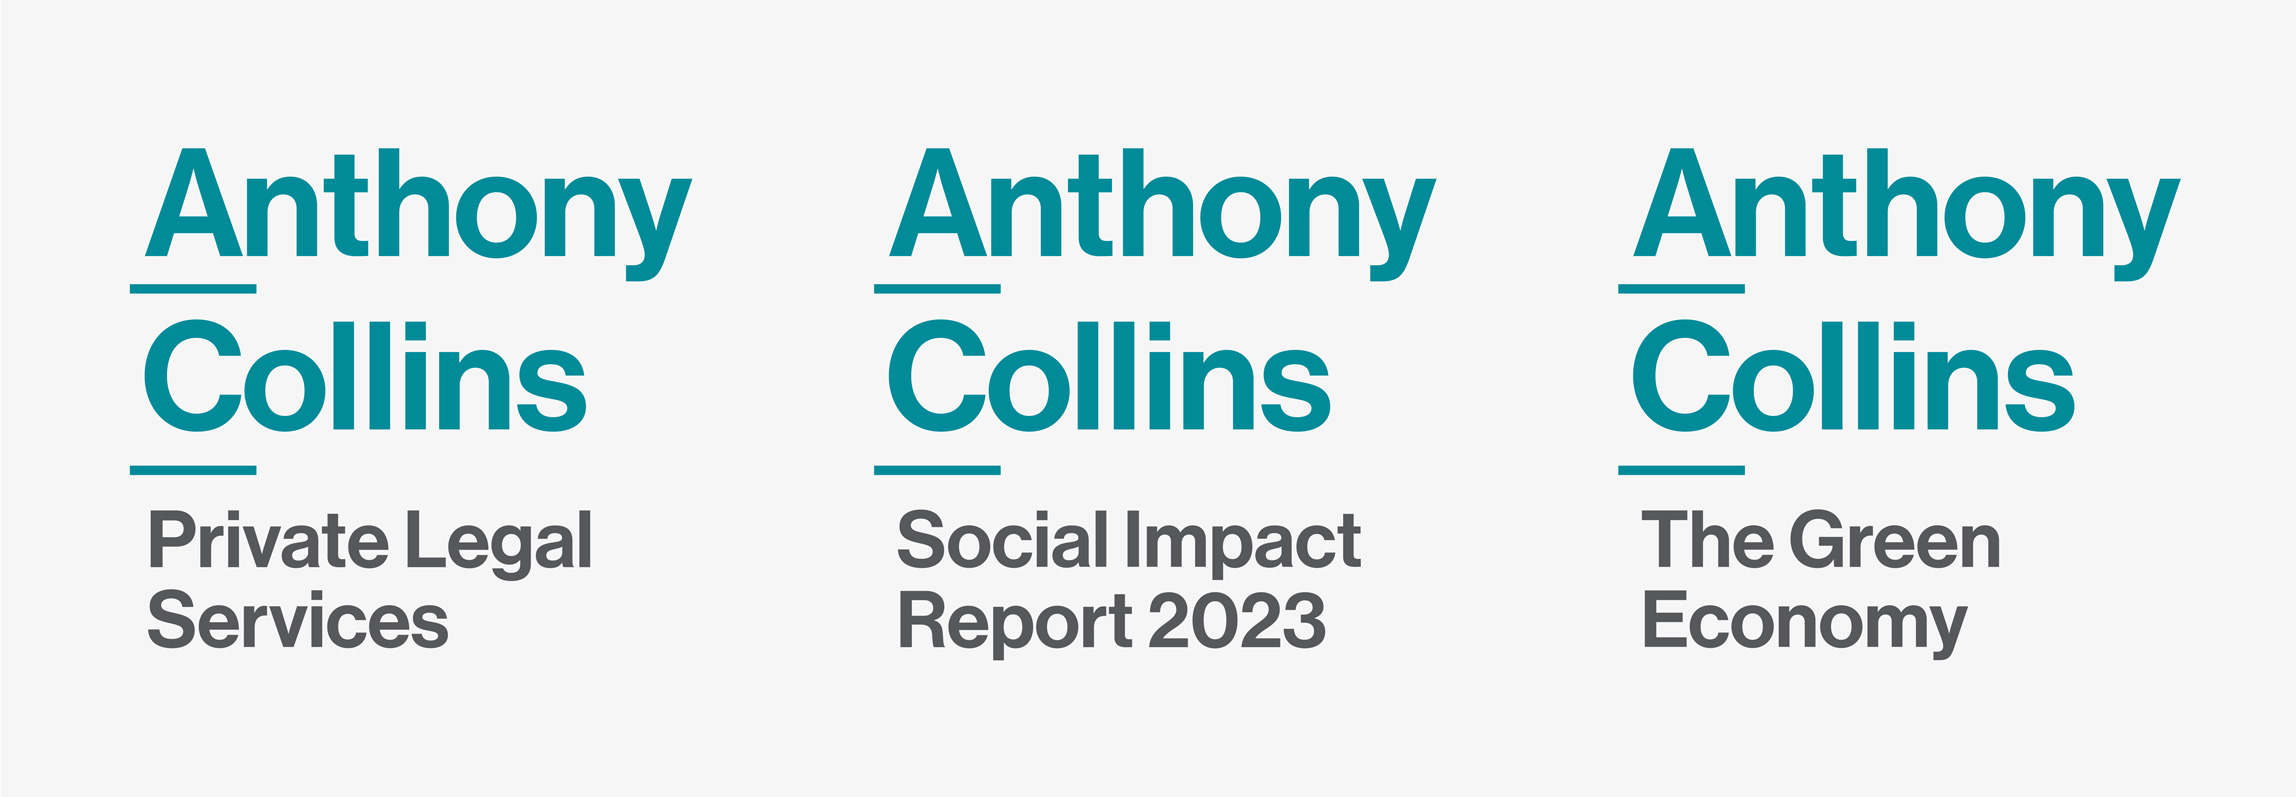 Anthony Collins Solicitors new logo brand architecture